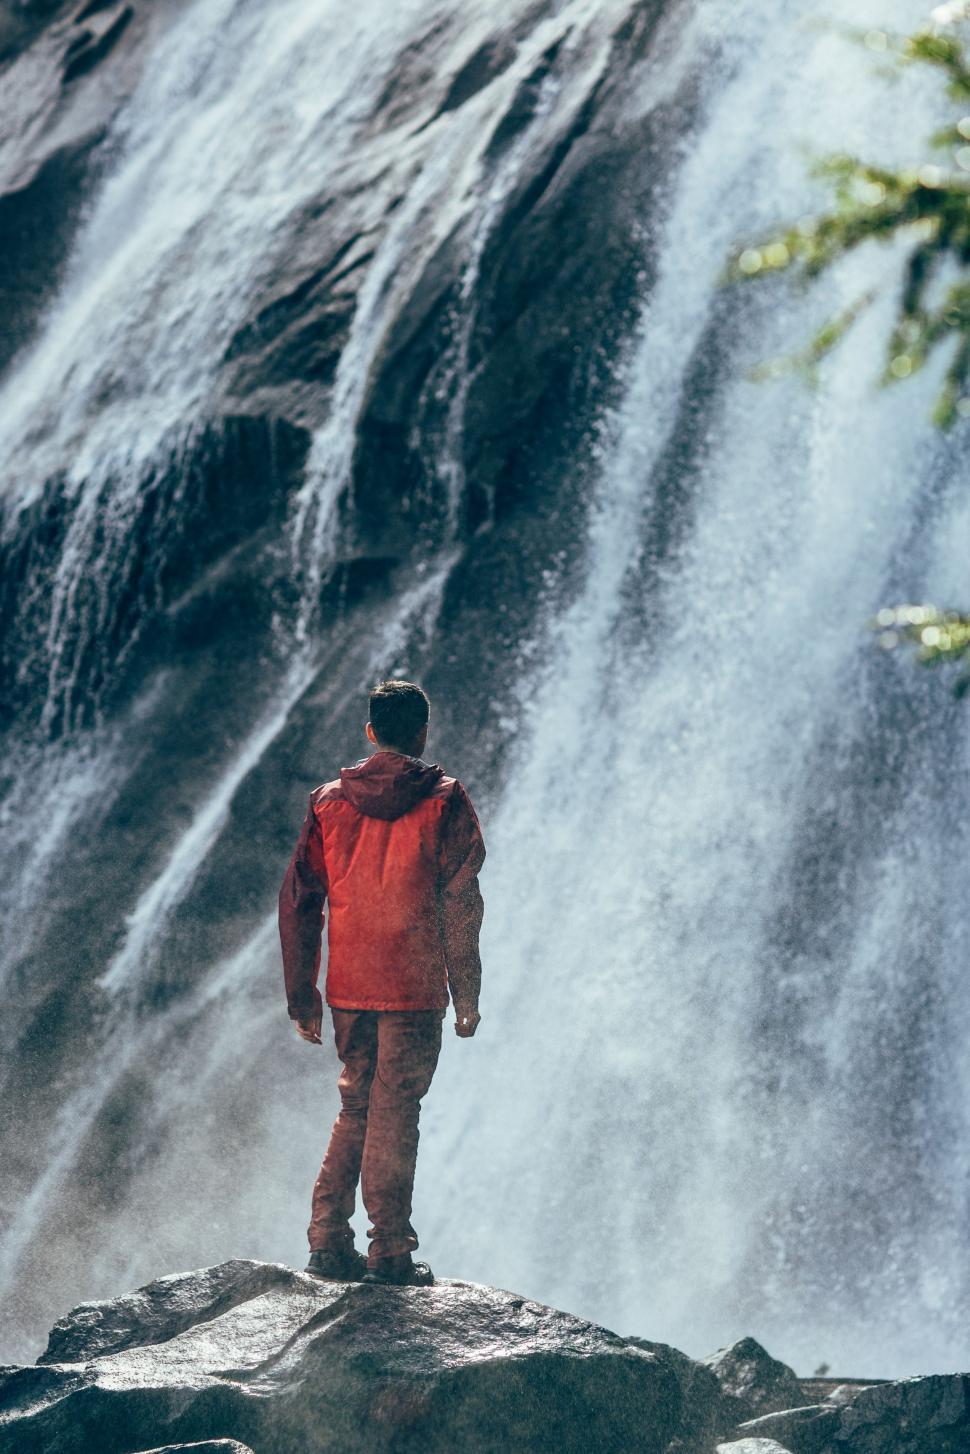 Free Image of Man Standing on Rock in Front of Waterfall 